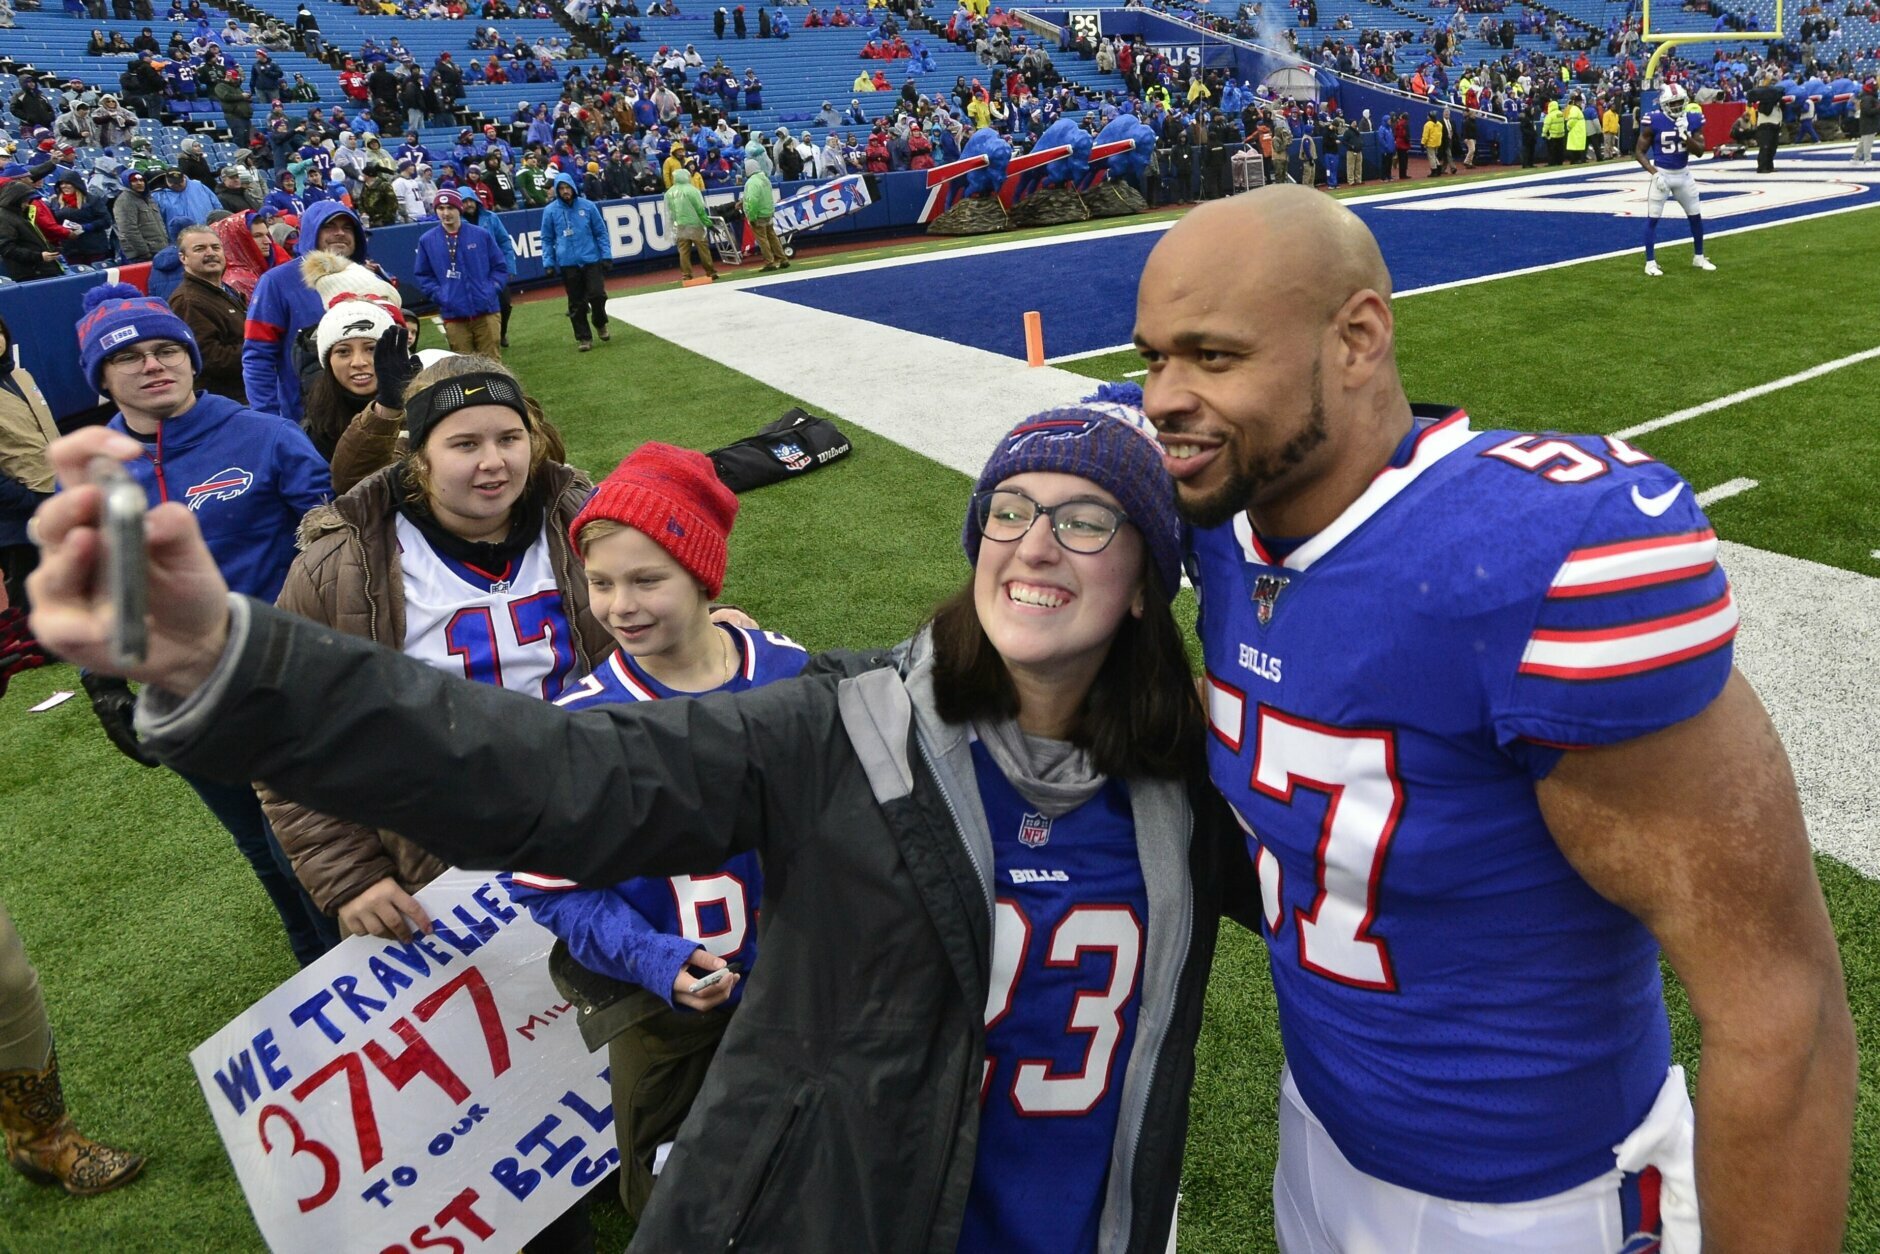 <p><b><i>Jets 13</i></b><br />
<b><i>Bills 6</i></b></p>
<p>Lorenzo Alexander is one of the best players to come through Washington in the otherwise-dark Snyder era, and it was good to see him <a href="https://profootballtalk.nbcsports.com/2019/12/29/lorenzo-alexander-leaves-early-to-loud-ovation-from-bills-fans/" target="_blank" rel="noopener">get his due</a> in what figures to be his final regular season game in Buffalo. <a href="https://www.theplayerstribune.com/en-us/articles/lorenzo-alexander-bills-pro-bowl-2017" target="_blank" rel="noopener">His story</a> is one of the best in league history and any Redskins fan should be thrilled to see him make a solid playoff run with the Bills.</p>
<p>For better or worse, the Jets went from 1-7 embarrassment to playoff spoiler, going 6-2 down the stretch with half of those wins coming against teams vying for an AFC wild card. But don&#8217;t get too excited for 2020, New York — 7-9 is where Adam Gase lives.</p>
